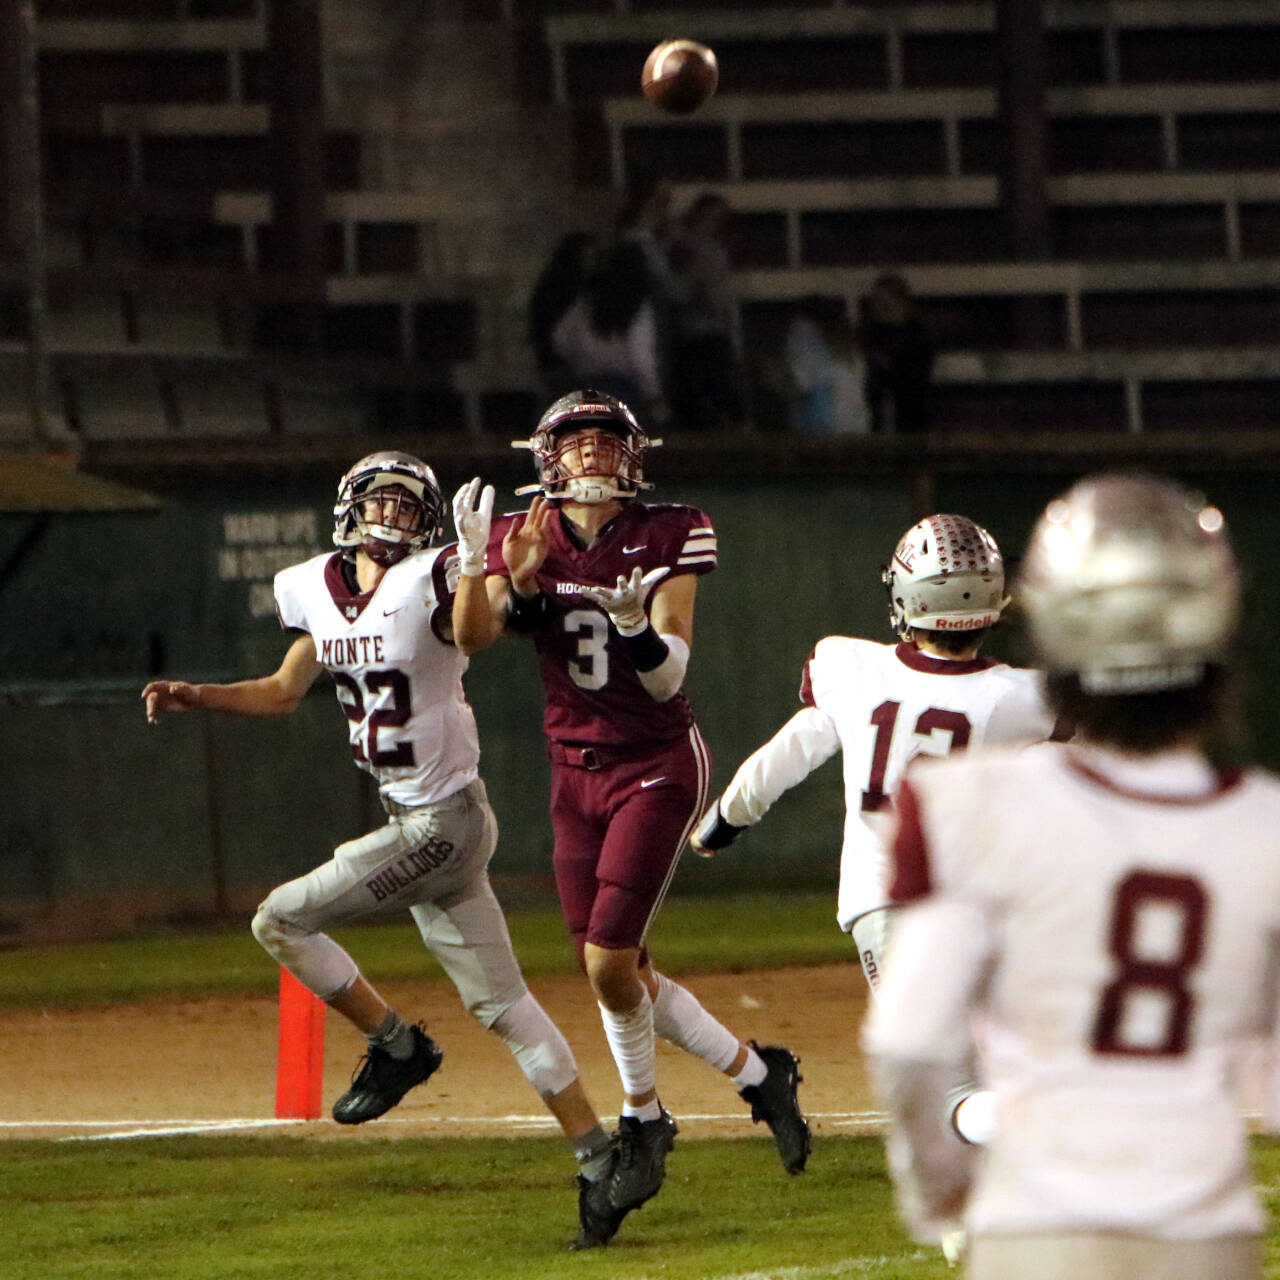 PHOTO BY BEN WINKELMAN Hoquiam senior receiver Owen McNeill (3) makes a touchdown catch while being defended by Montesano’s Bode Poler (22) during the Bulldogs’ 47-6 victory on Friday at Olympic Stadium in Hoquiam.